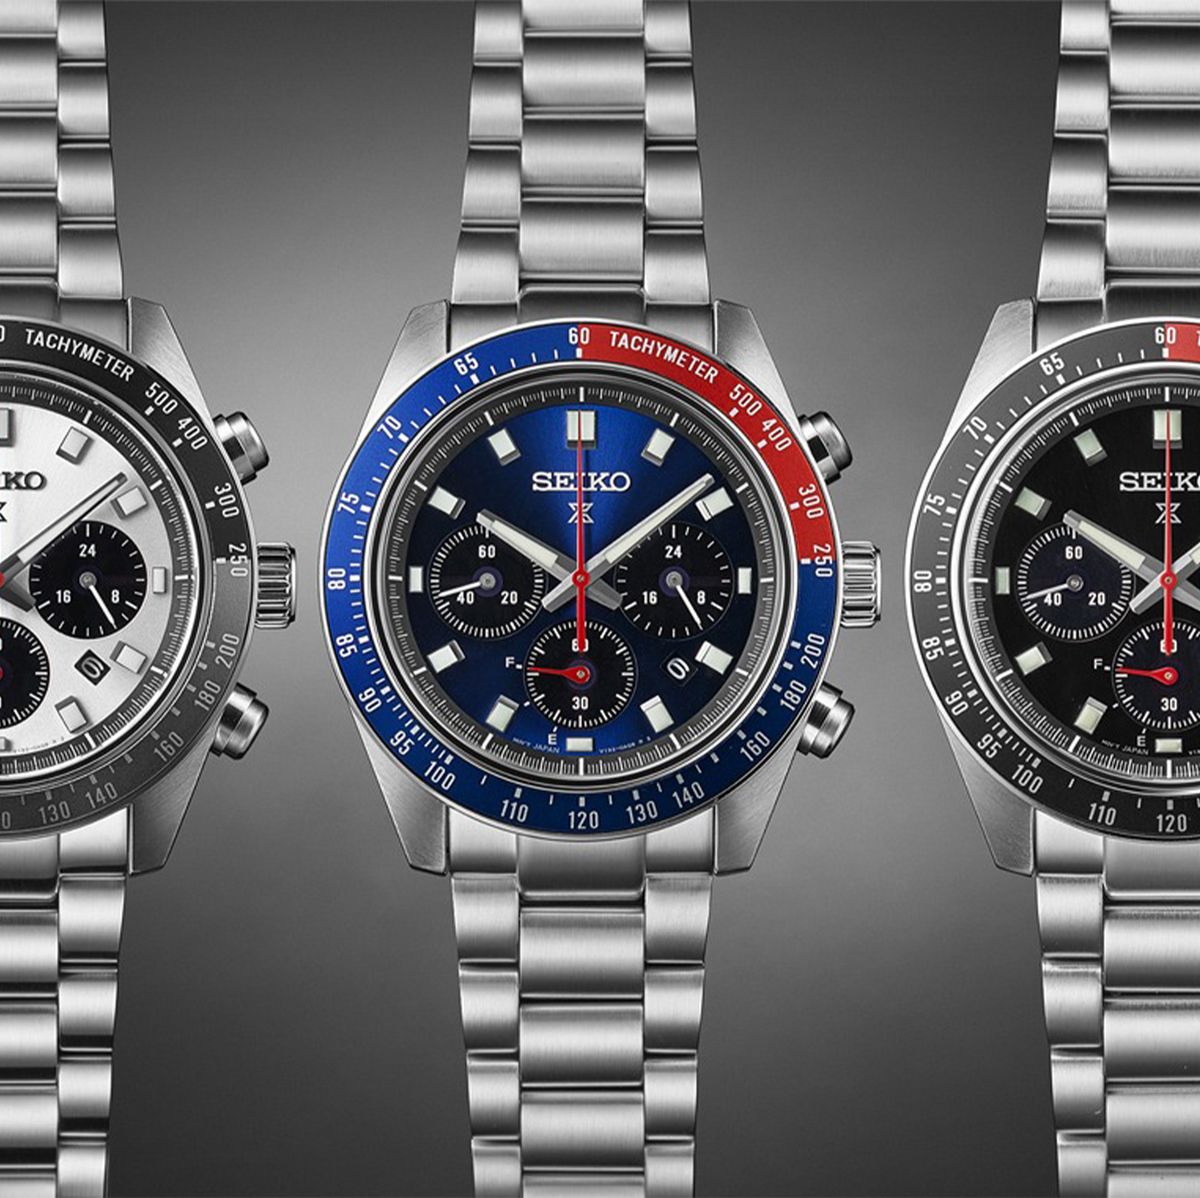 New Speedtimer Chronographs Are Sure Excite Watch Fans